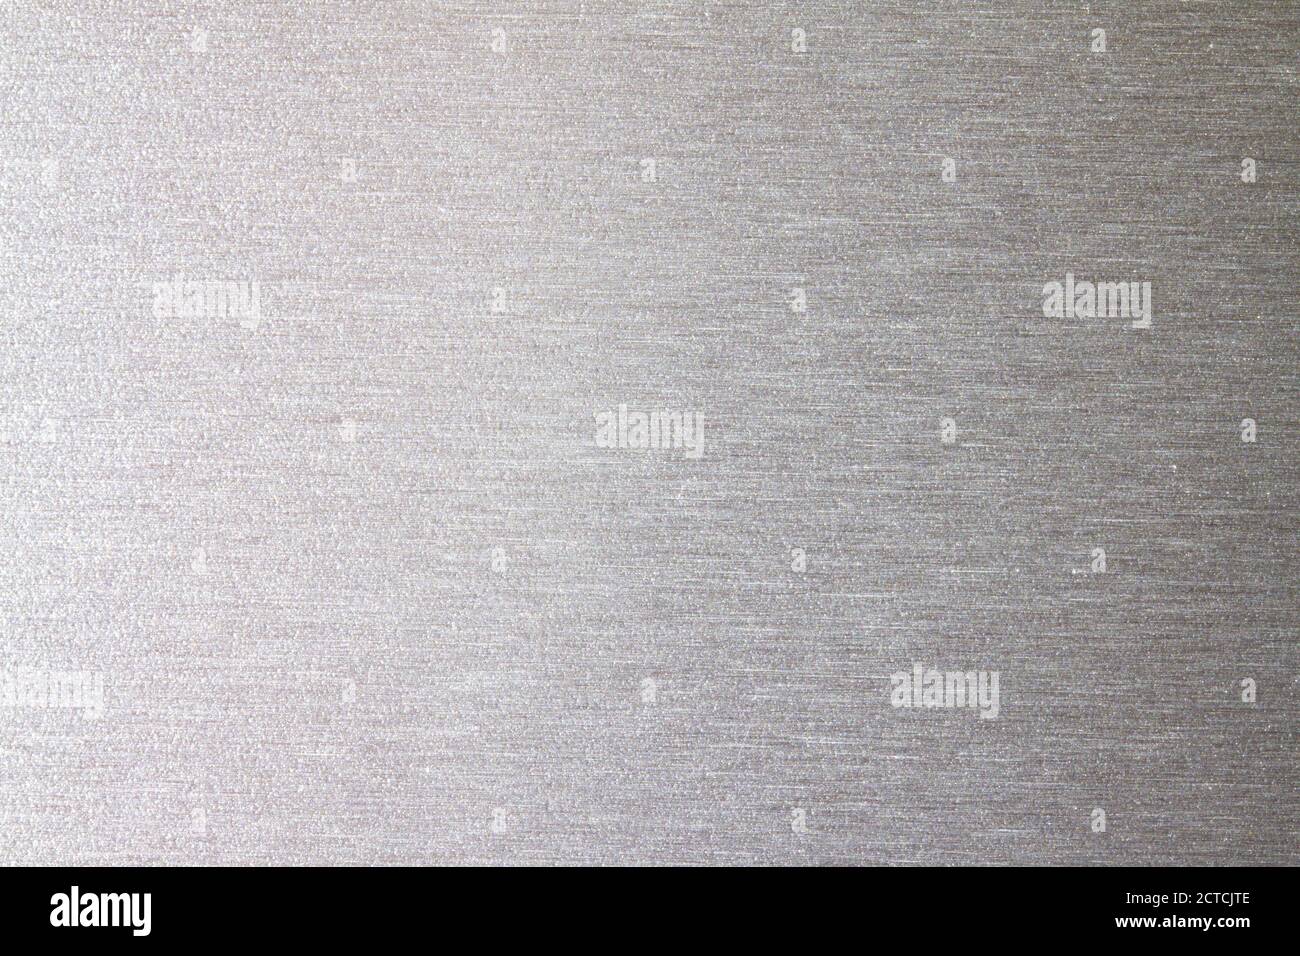 Silver metal background texture Stock Photo